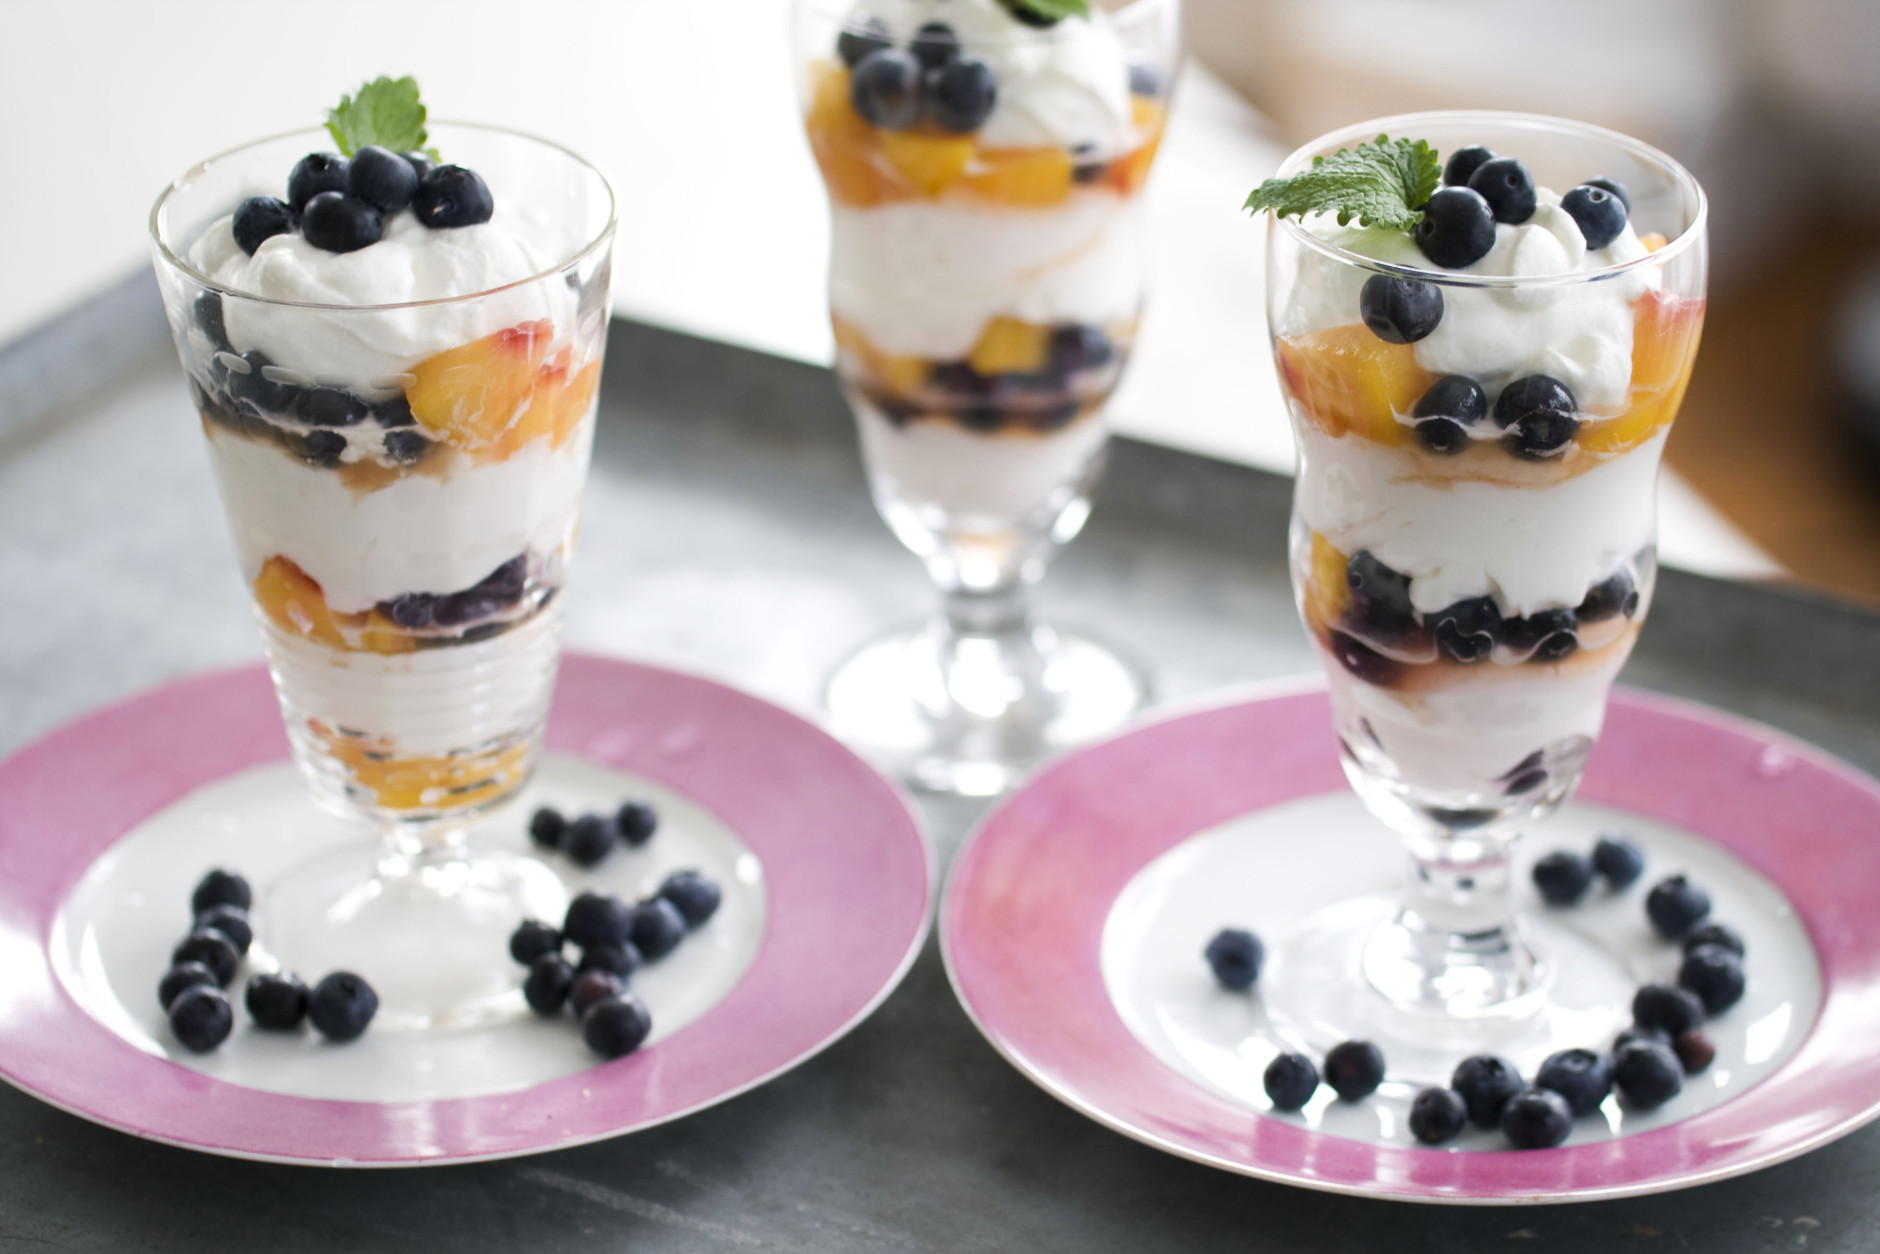 In this image taken on April 15, 2013, easy blueberry-peach mousse parfaits are shown in Concord, N.H. (AP Photo/Matthew Mead)